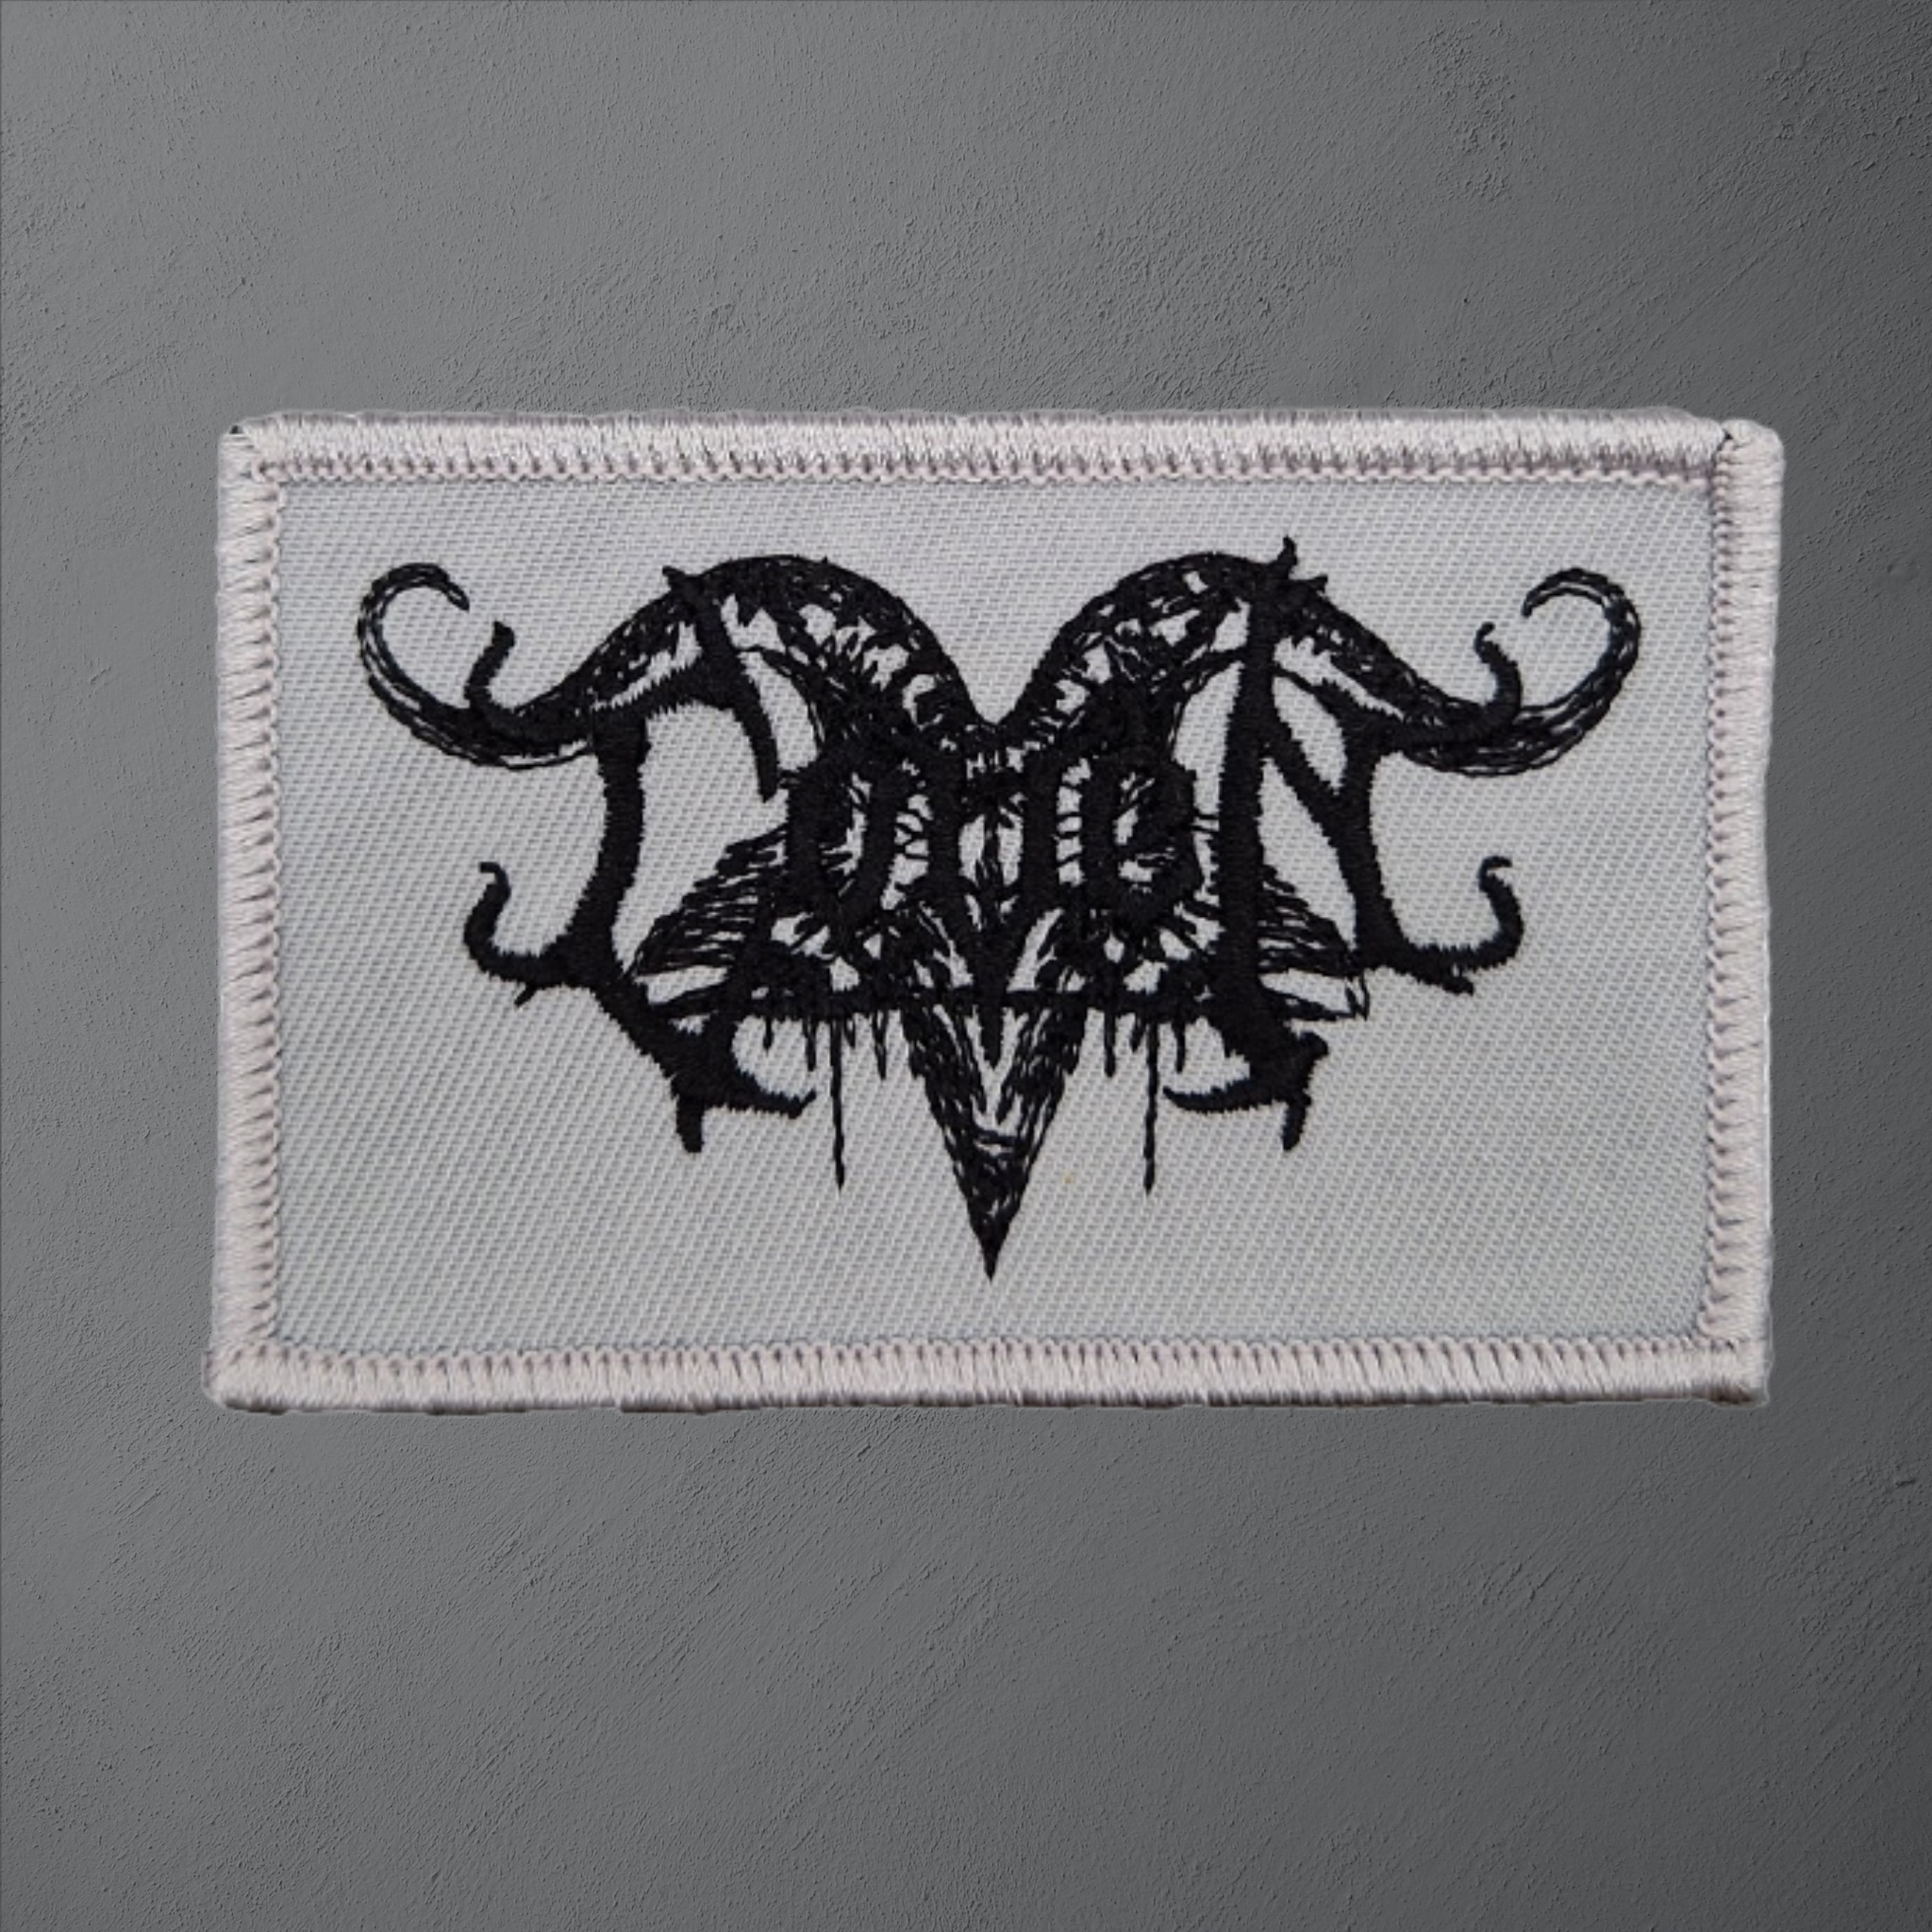 Coven - BMV III - Patch